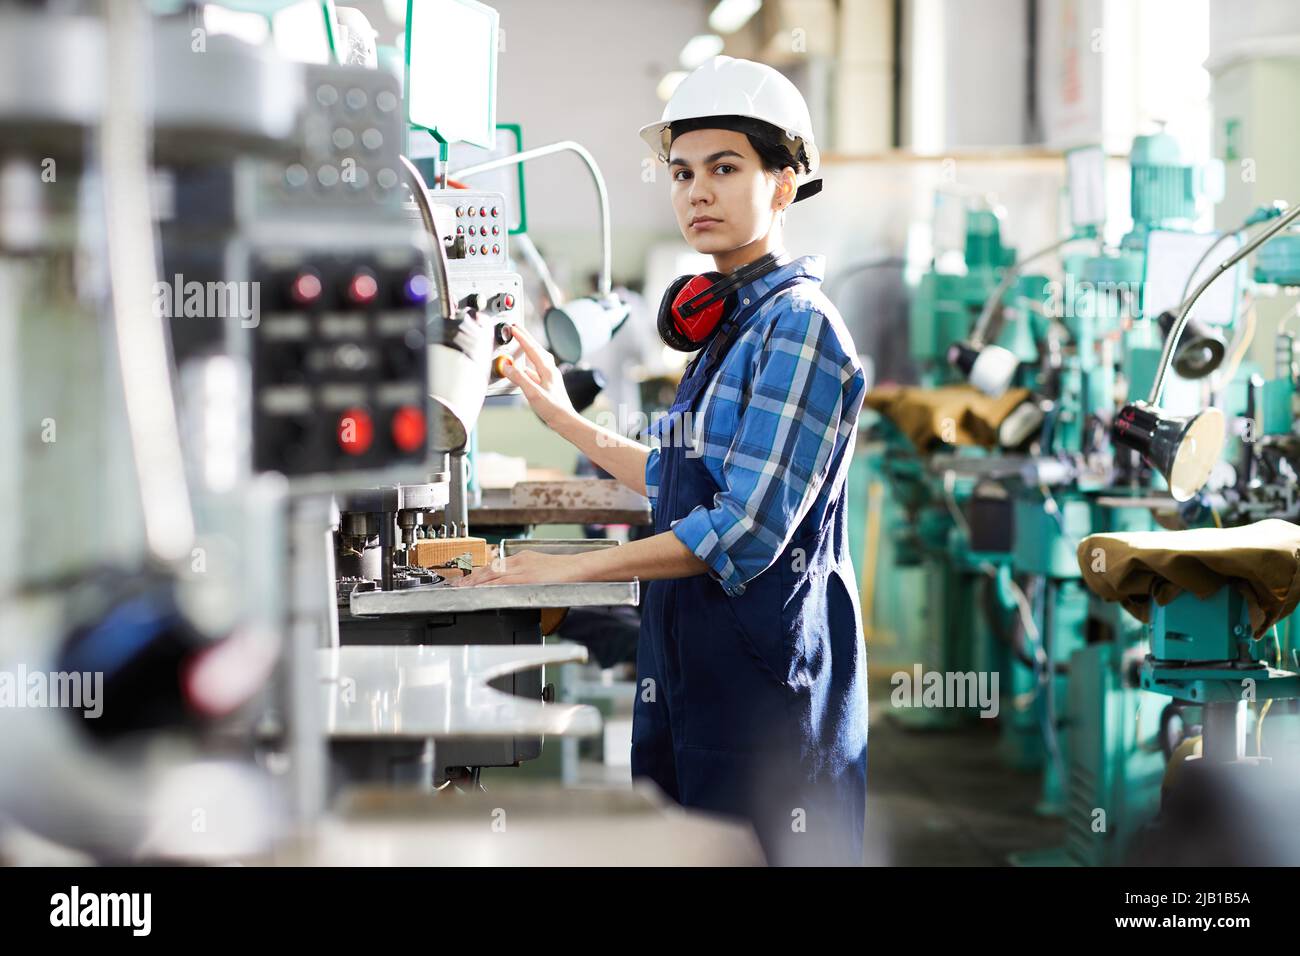 Serious thoughtful woman engineer in uniform standing at industrial machine and producing small gear for wristwatch, she working at production line Stock Photo